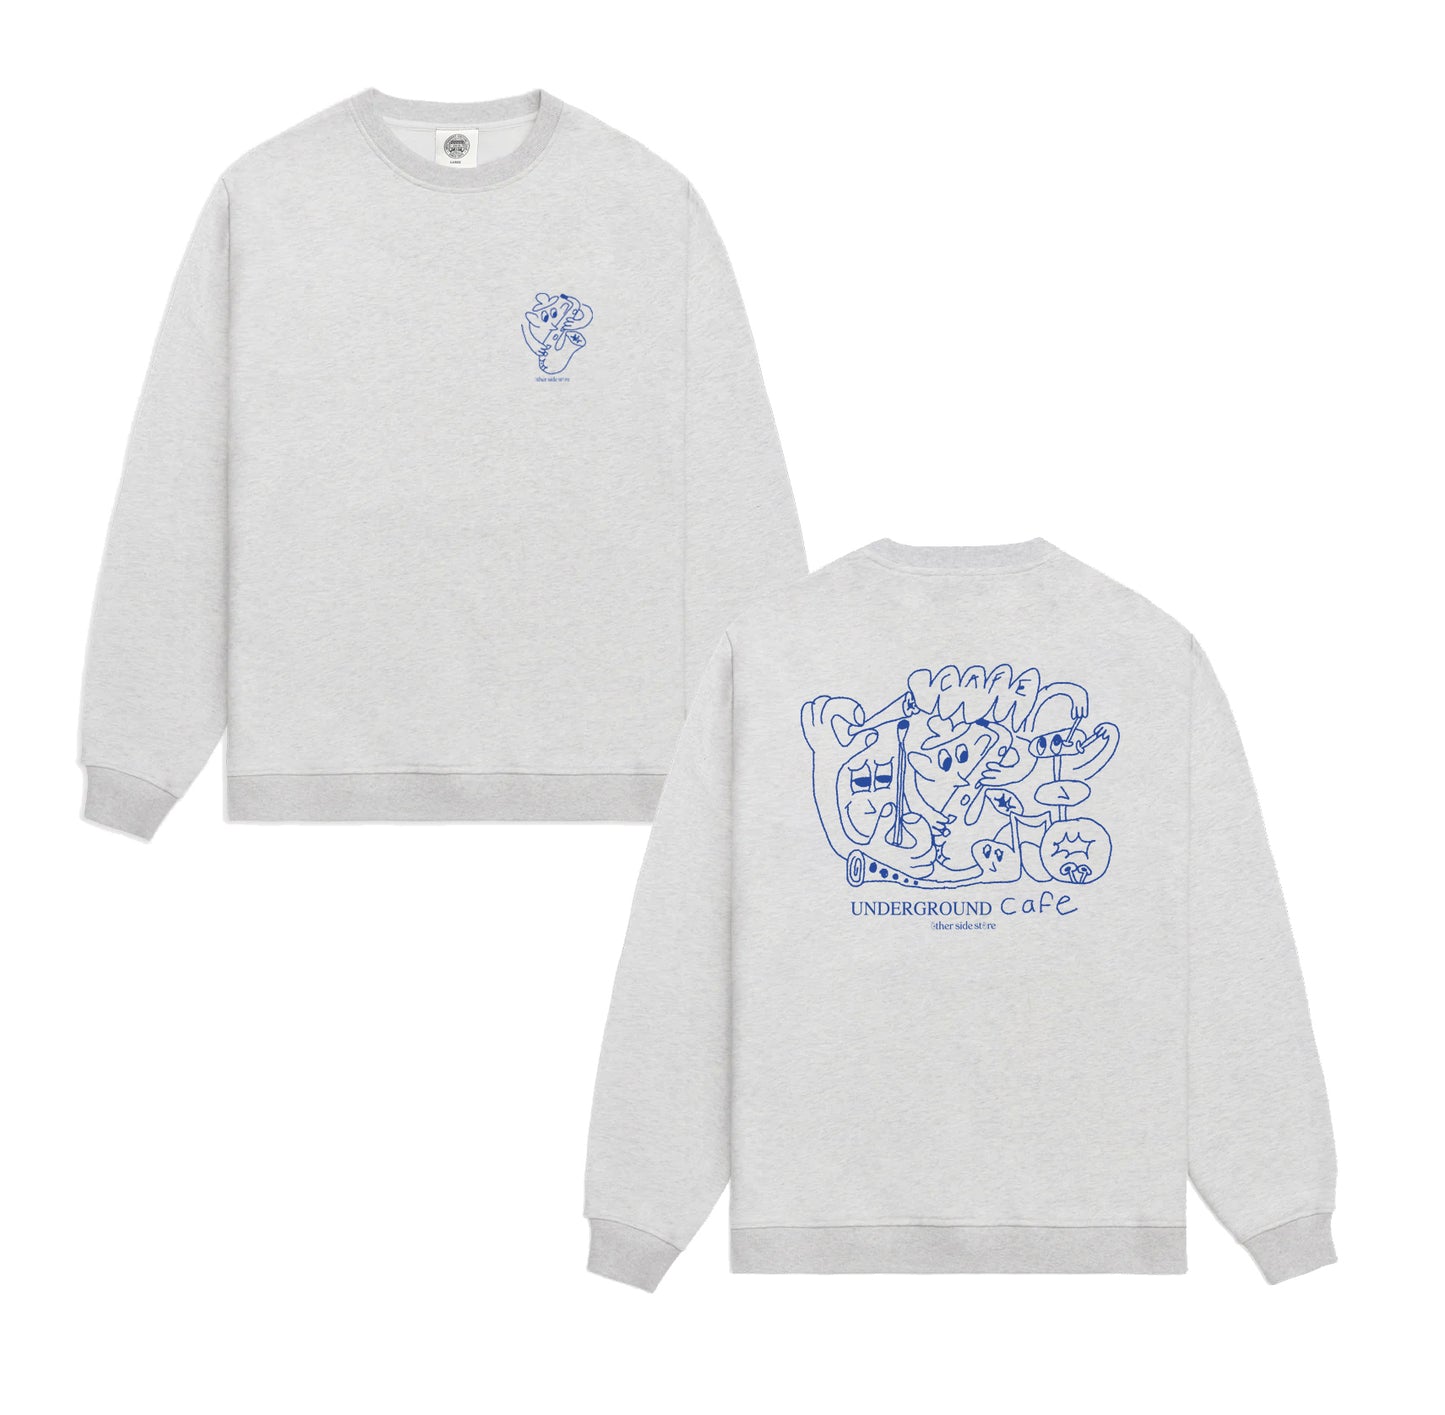 Other Side Store 'Underground Cafe' Sweater - Grey